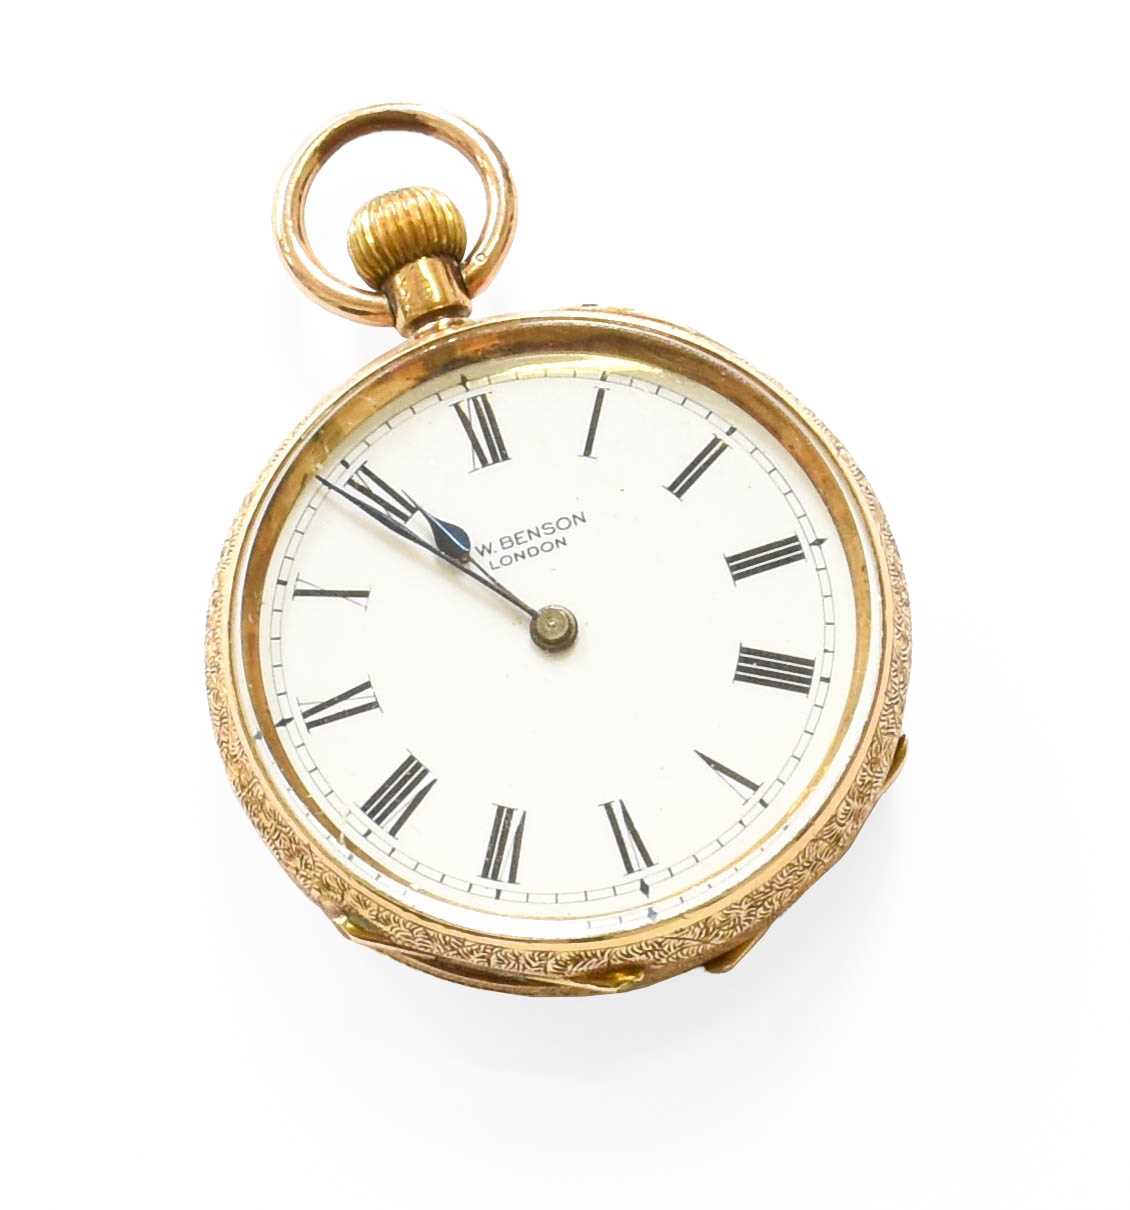 Lot 293 - A Lady's Fob Watch Retailed by J.W Benson...